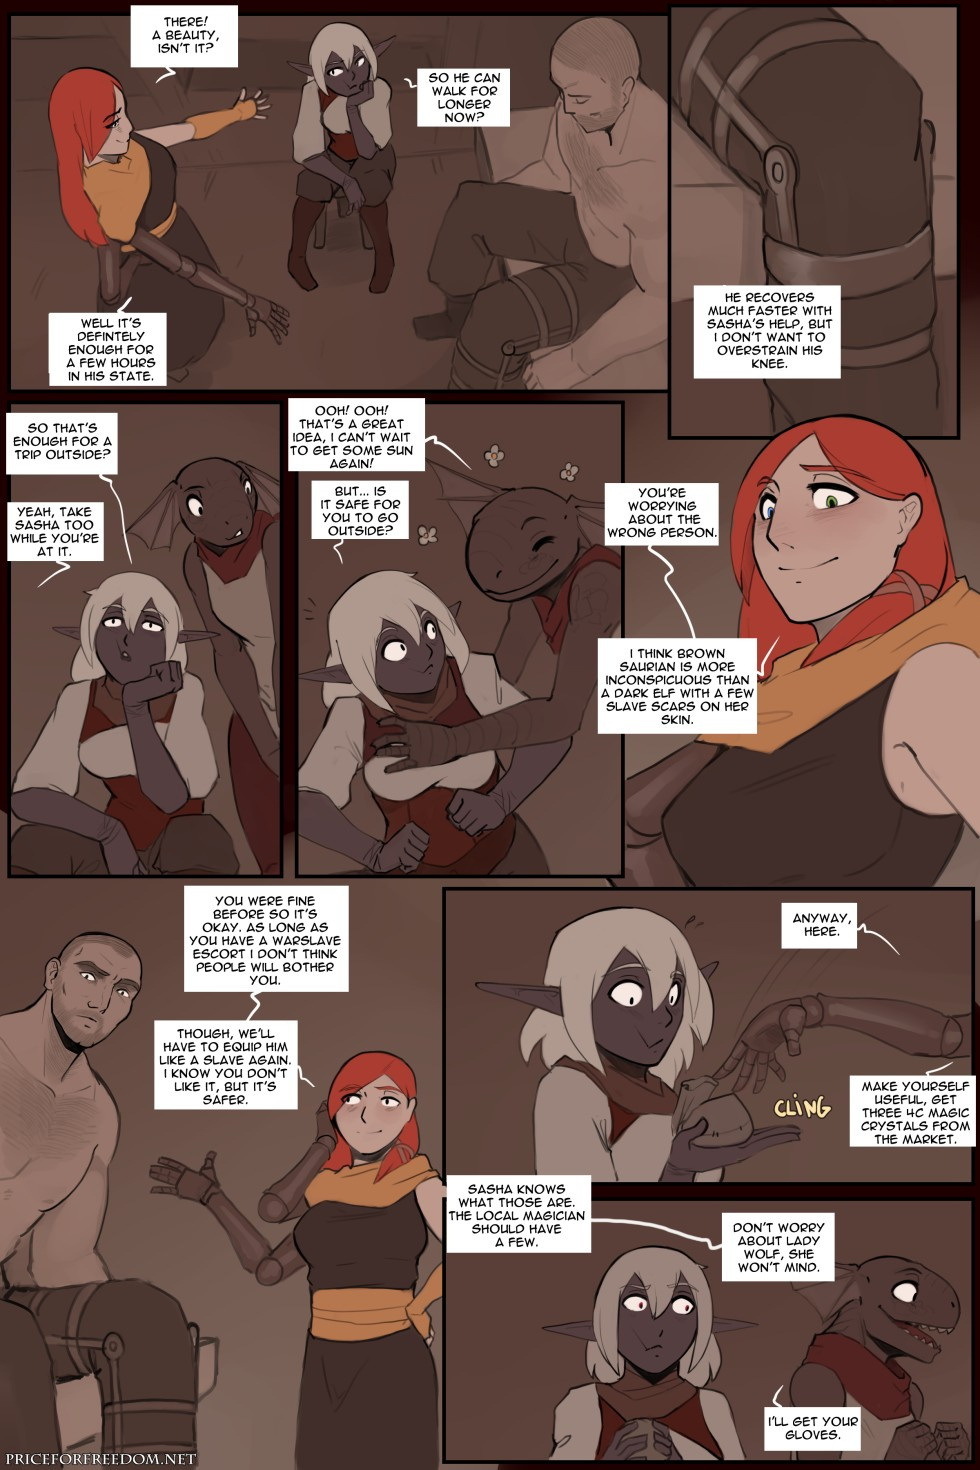 Price For Freedom - Page 358